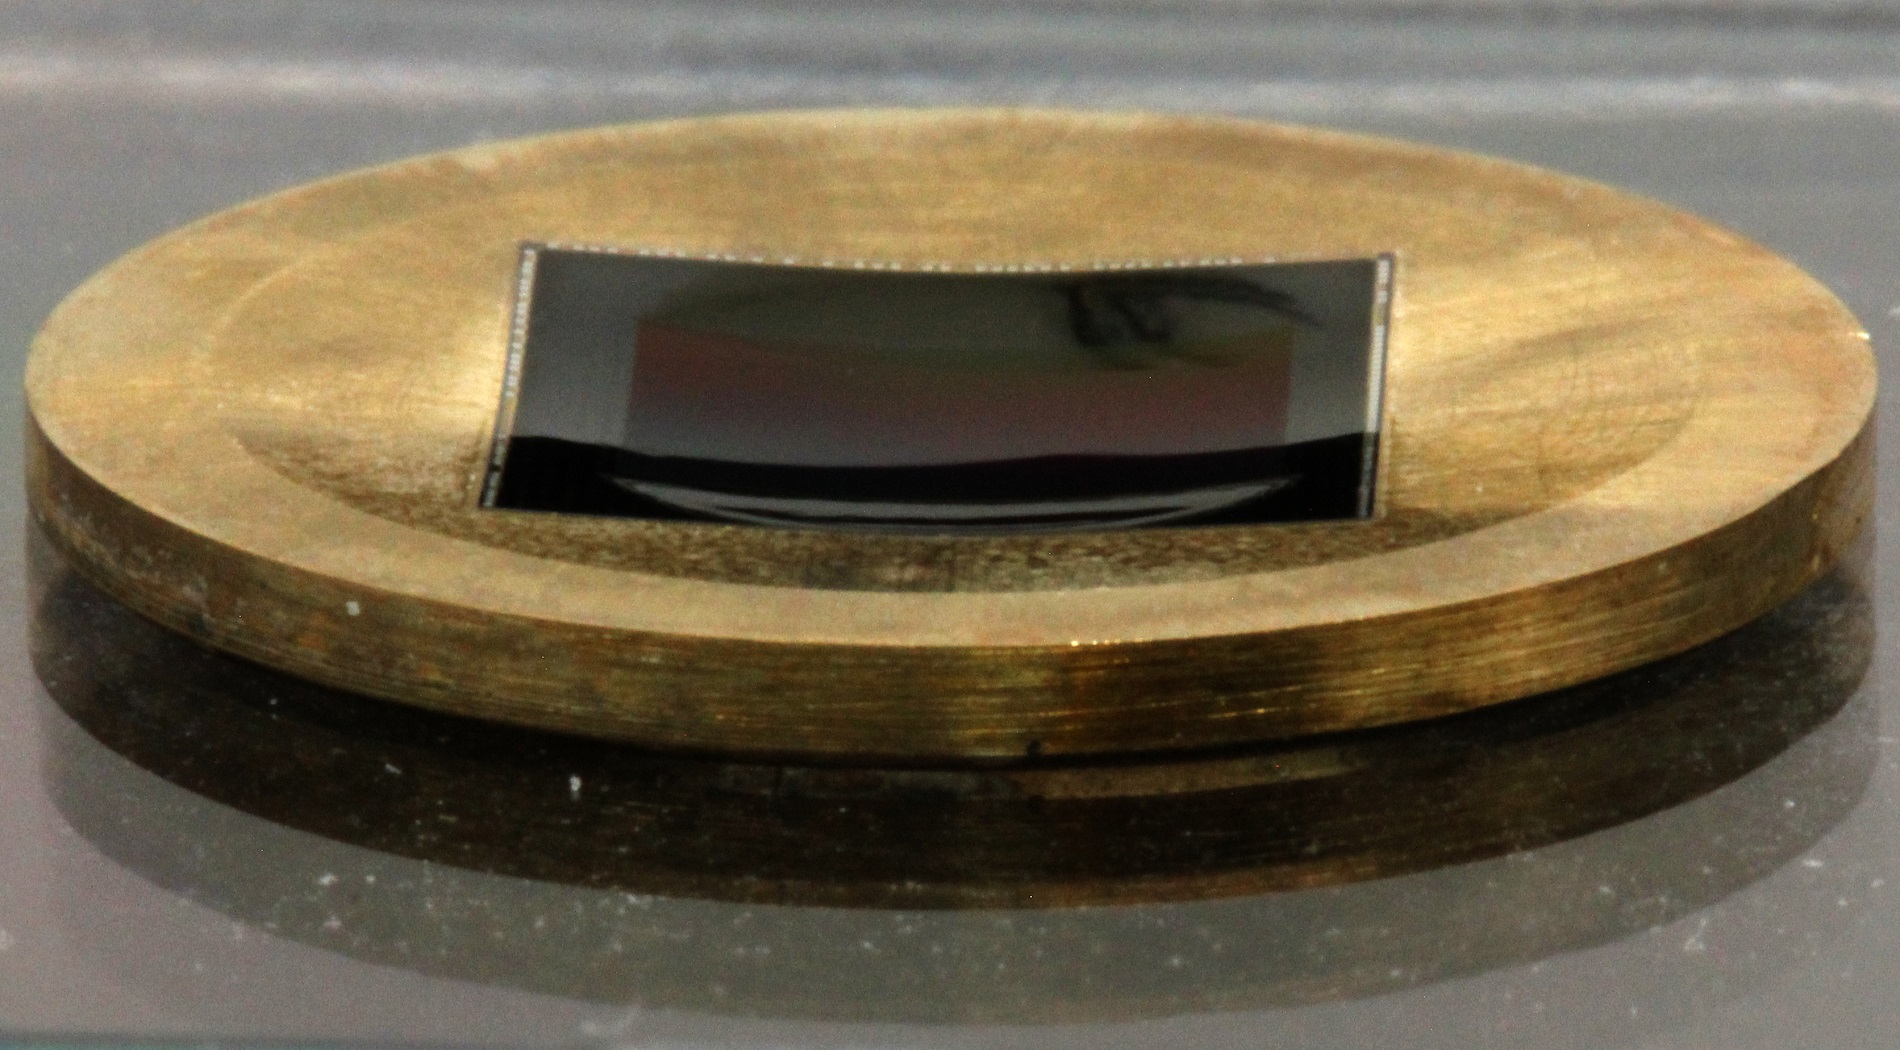 Researchers developed a way to create spherically curved image sensors by three-dimensionally bending off-the-shelf image sensors